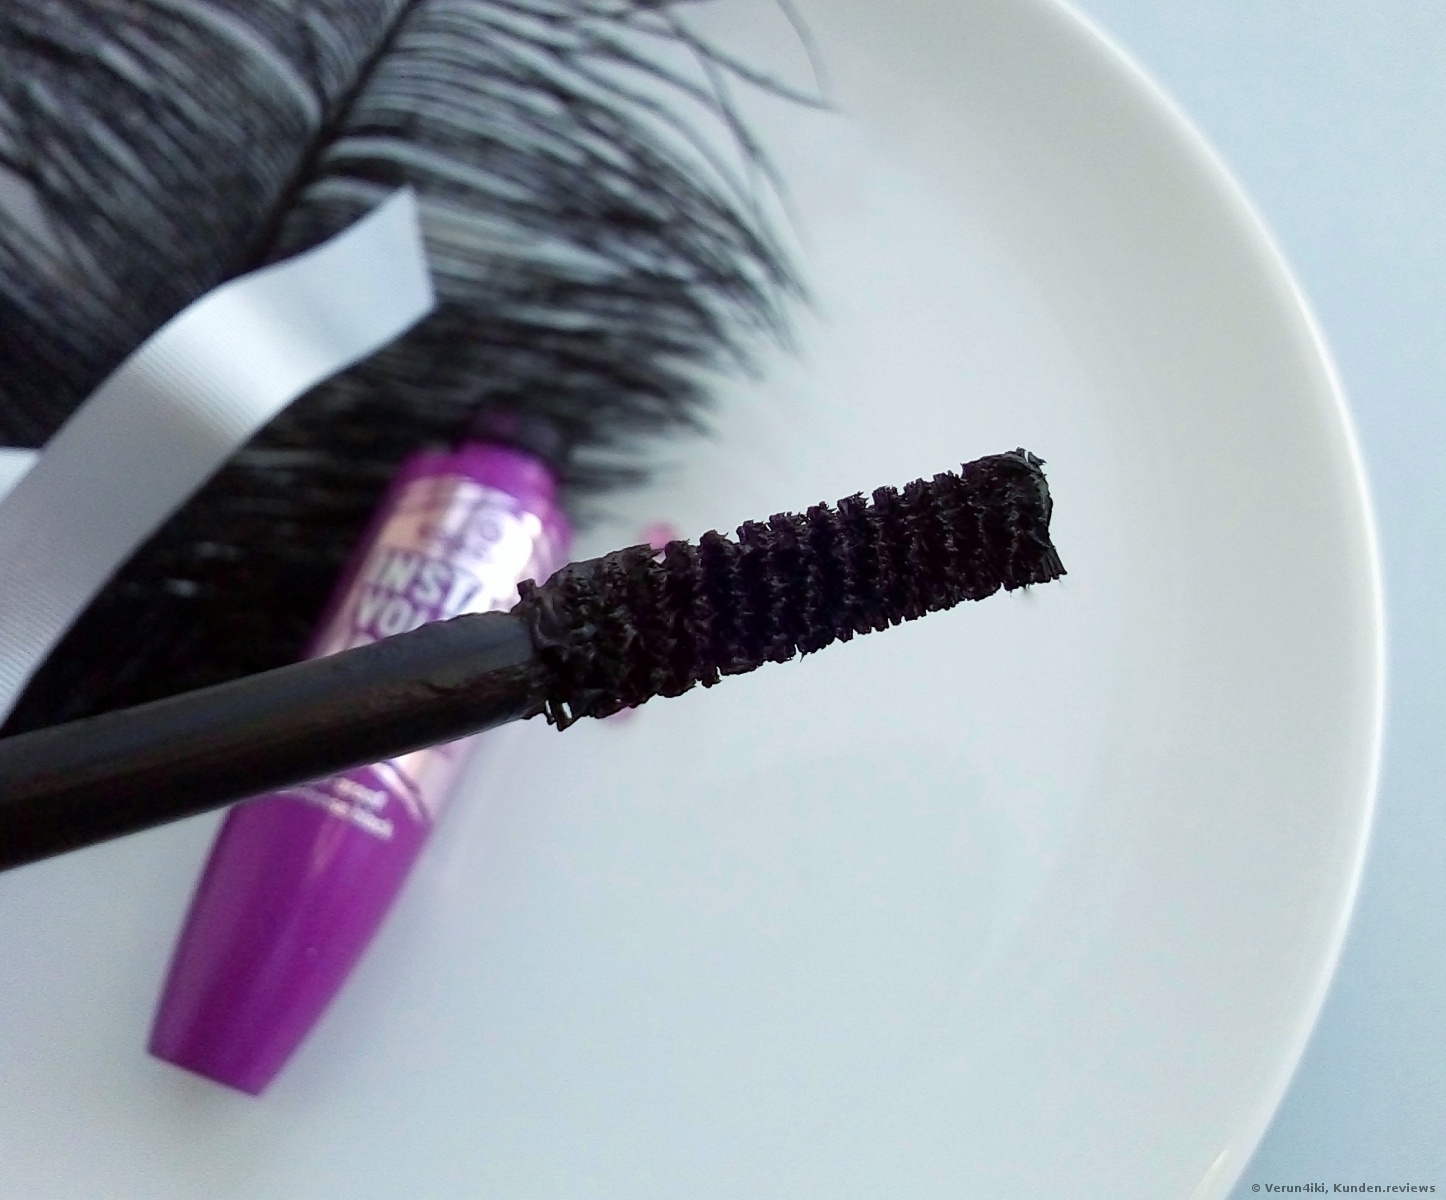 Essence instant volume boost mascara smudge-proof and intense black Foto